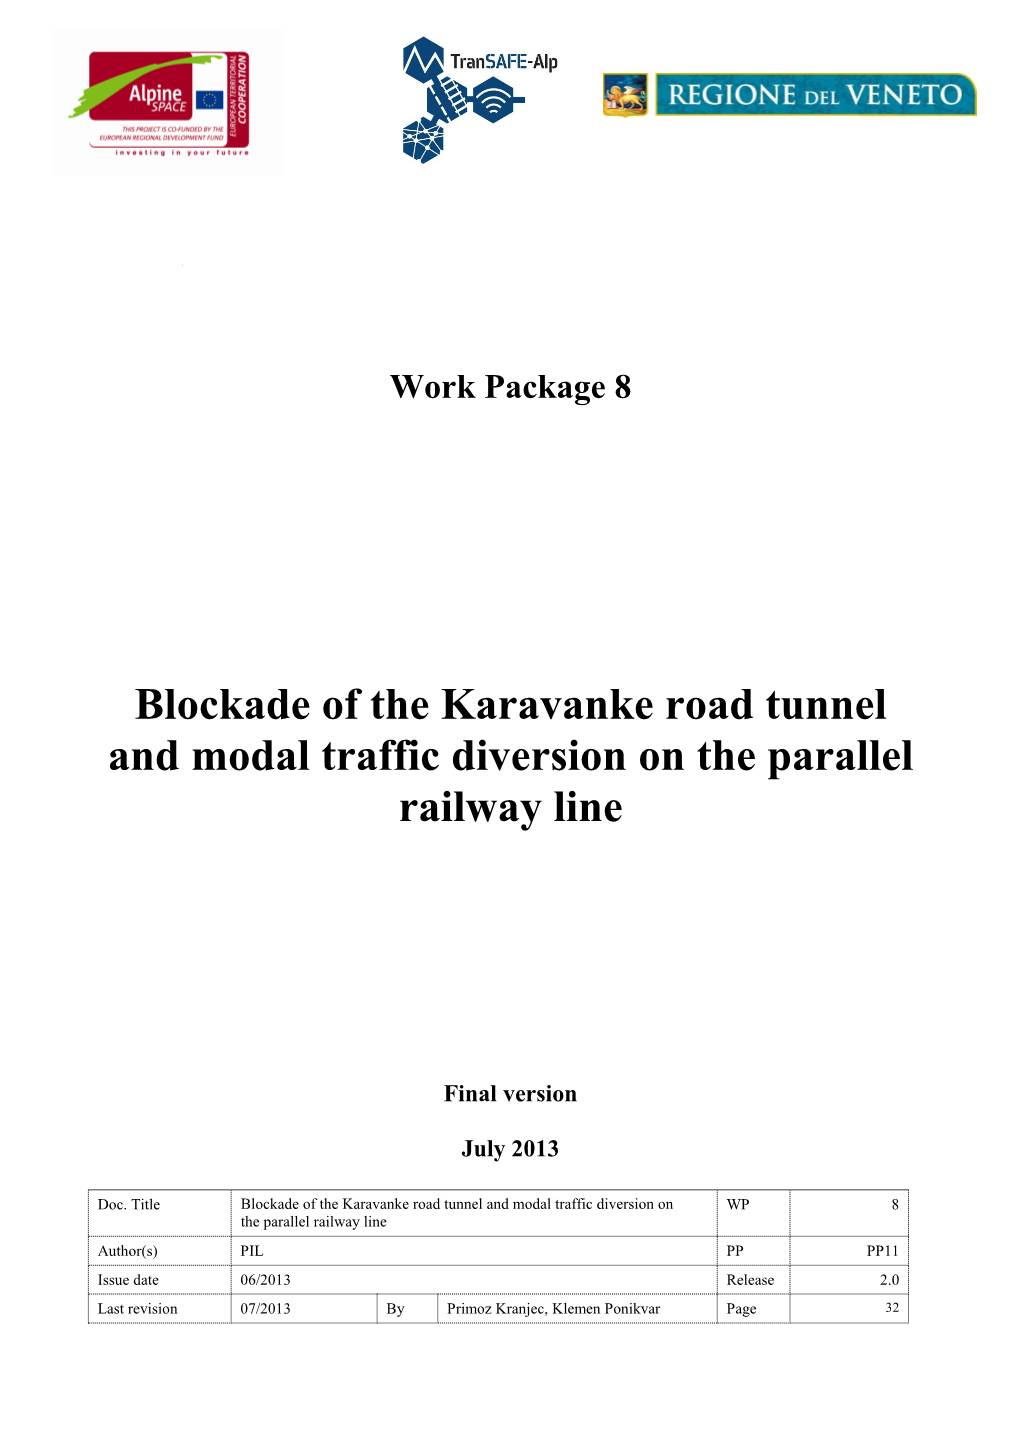 Blockade of the Karavanke Road Tunnel and Modal Traffic Diversion on the Parallel Railway Line